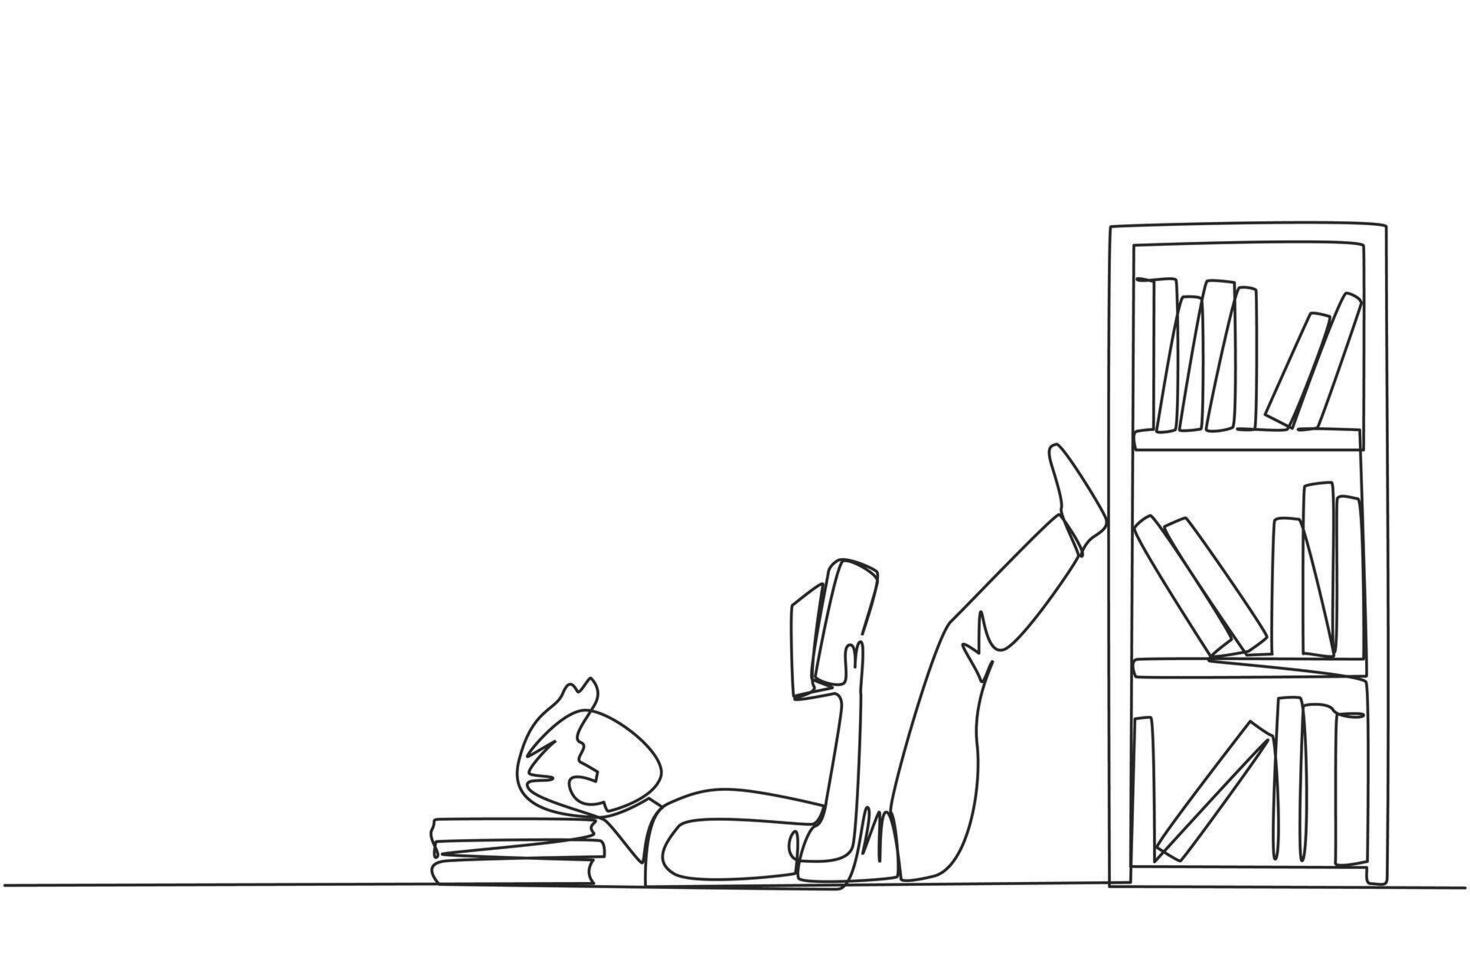 Single one line drawing man lying on back reading fiction story book near bookcase. Read slowly to enjoy the storyline. Hobby reading. Very good habit. Continuous line design graphic illustration vector